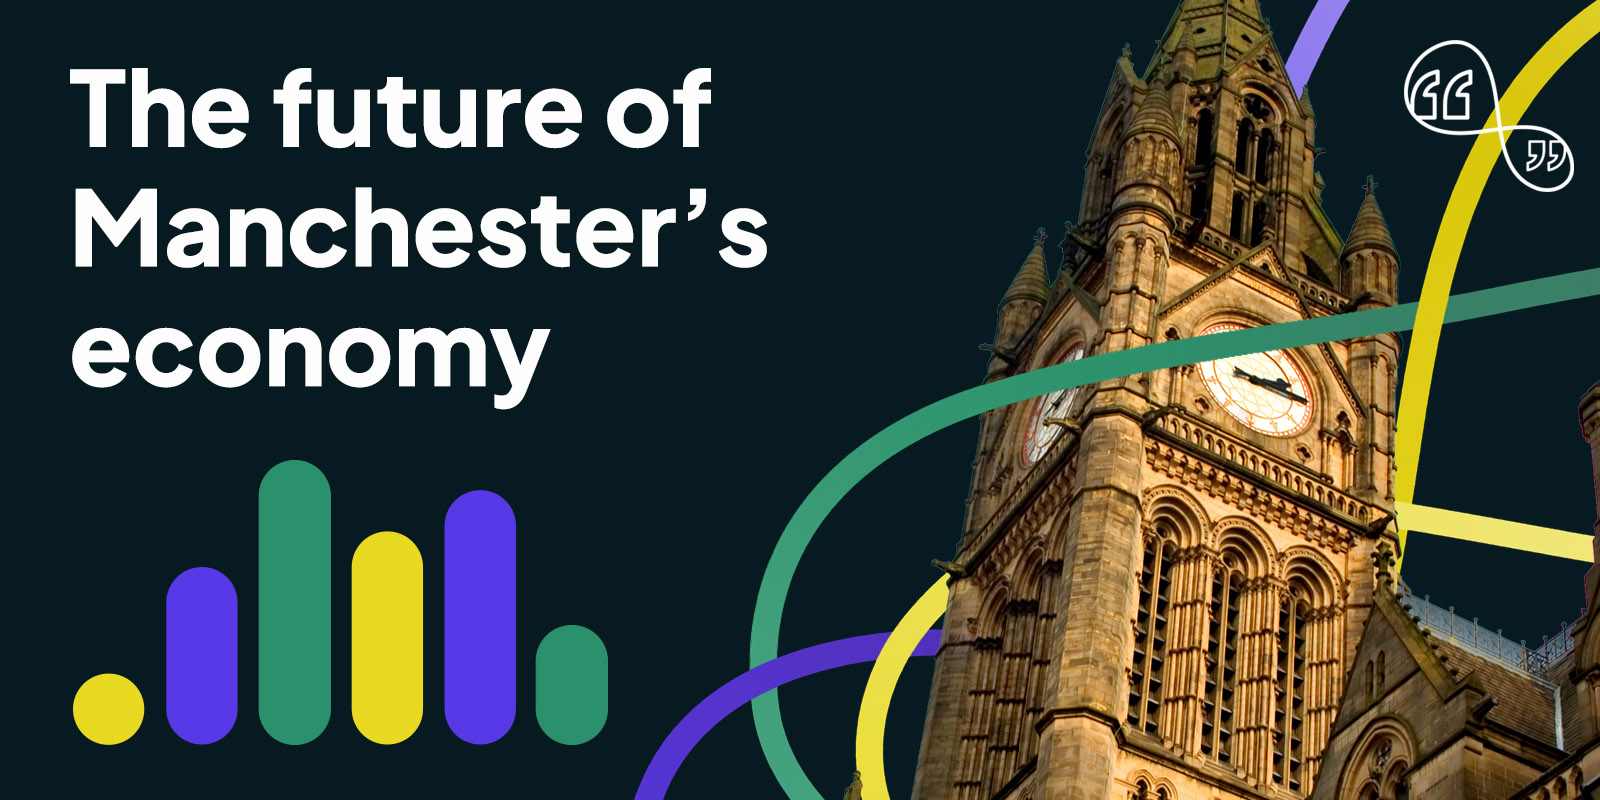 There is a light that never goes out: the future of Manchester’s economy